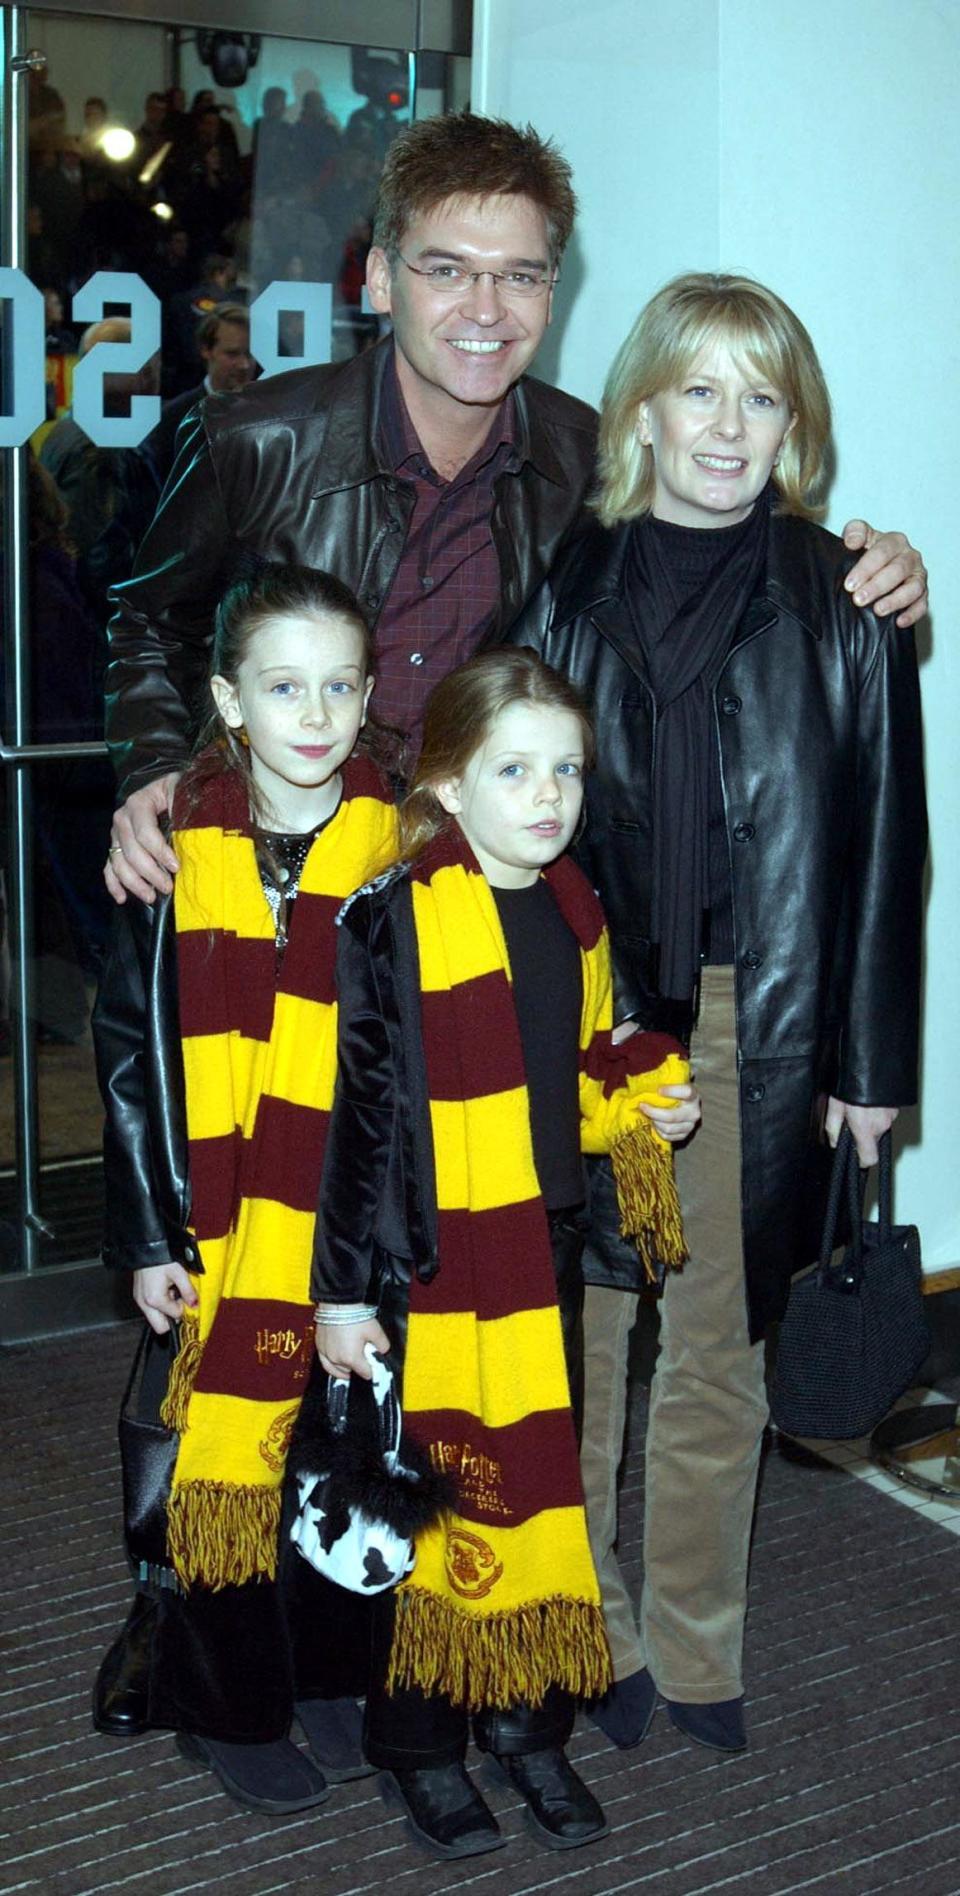 TV presenter Phillip Schofield arrives with his wife Stephanie, and children Ruby (right) and Molly for the celebrity film premiere of Harry Potter and the Chamber of Secrets at the Odeon Leicester Square in London's West End.